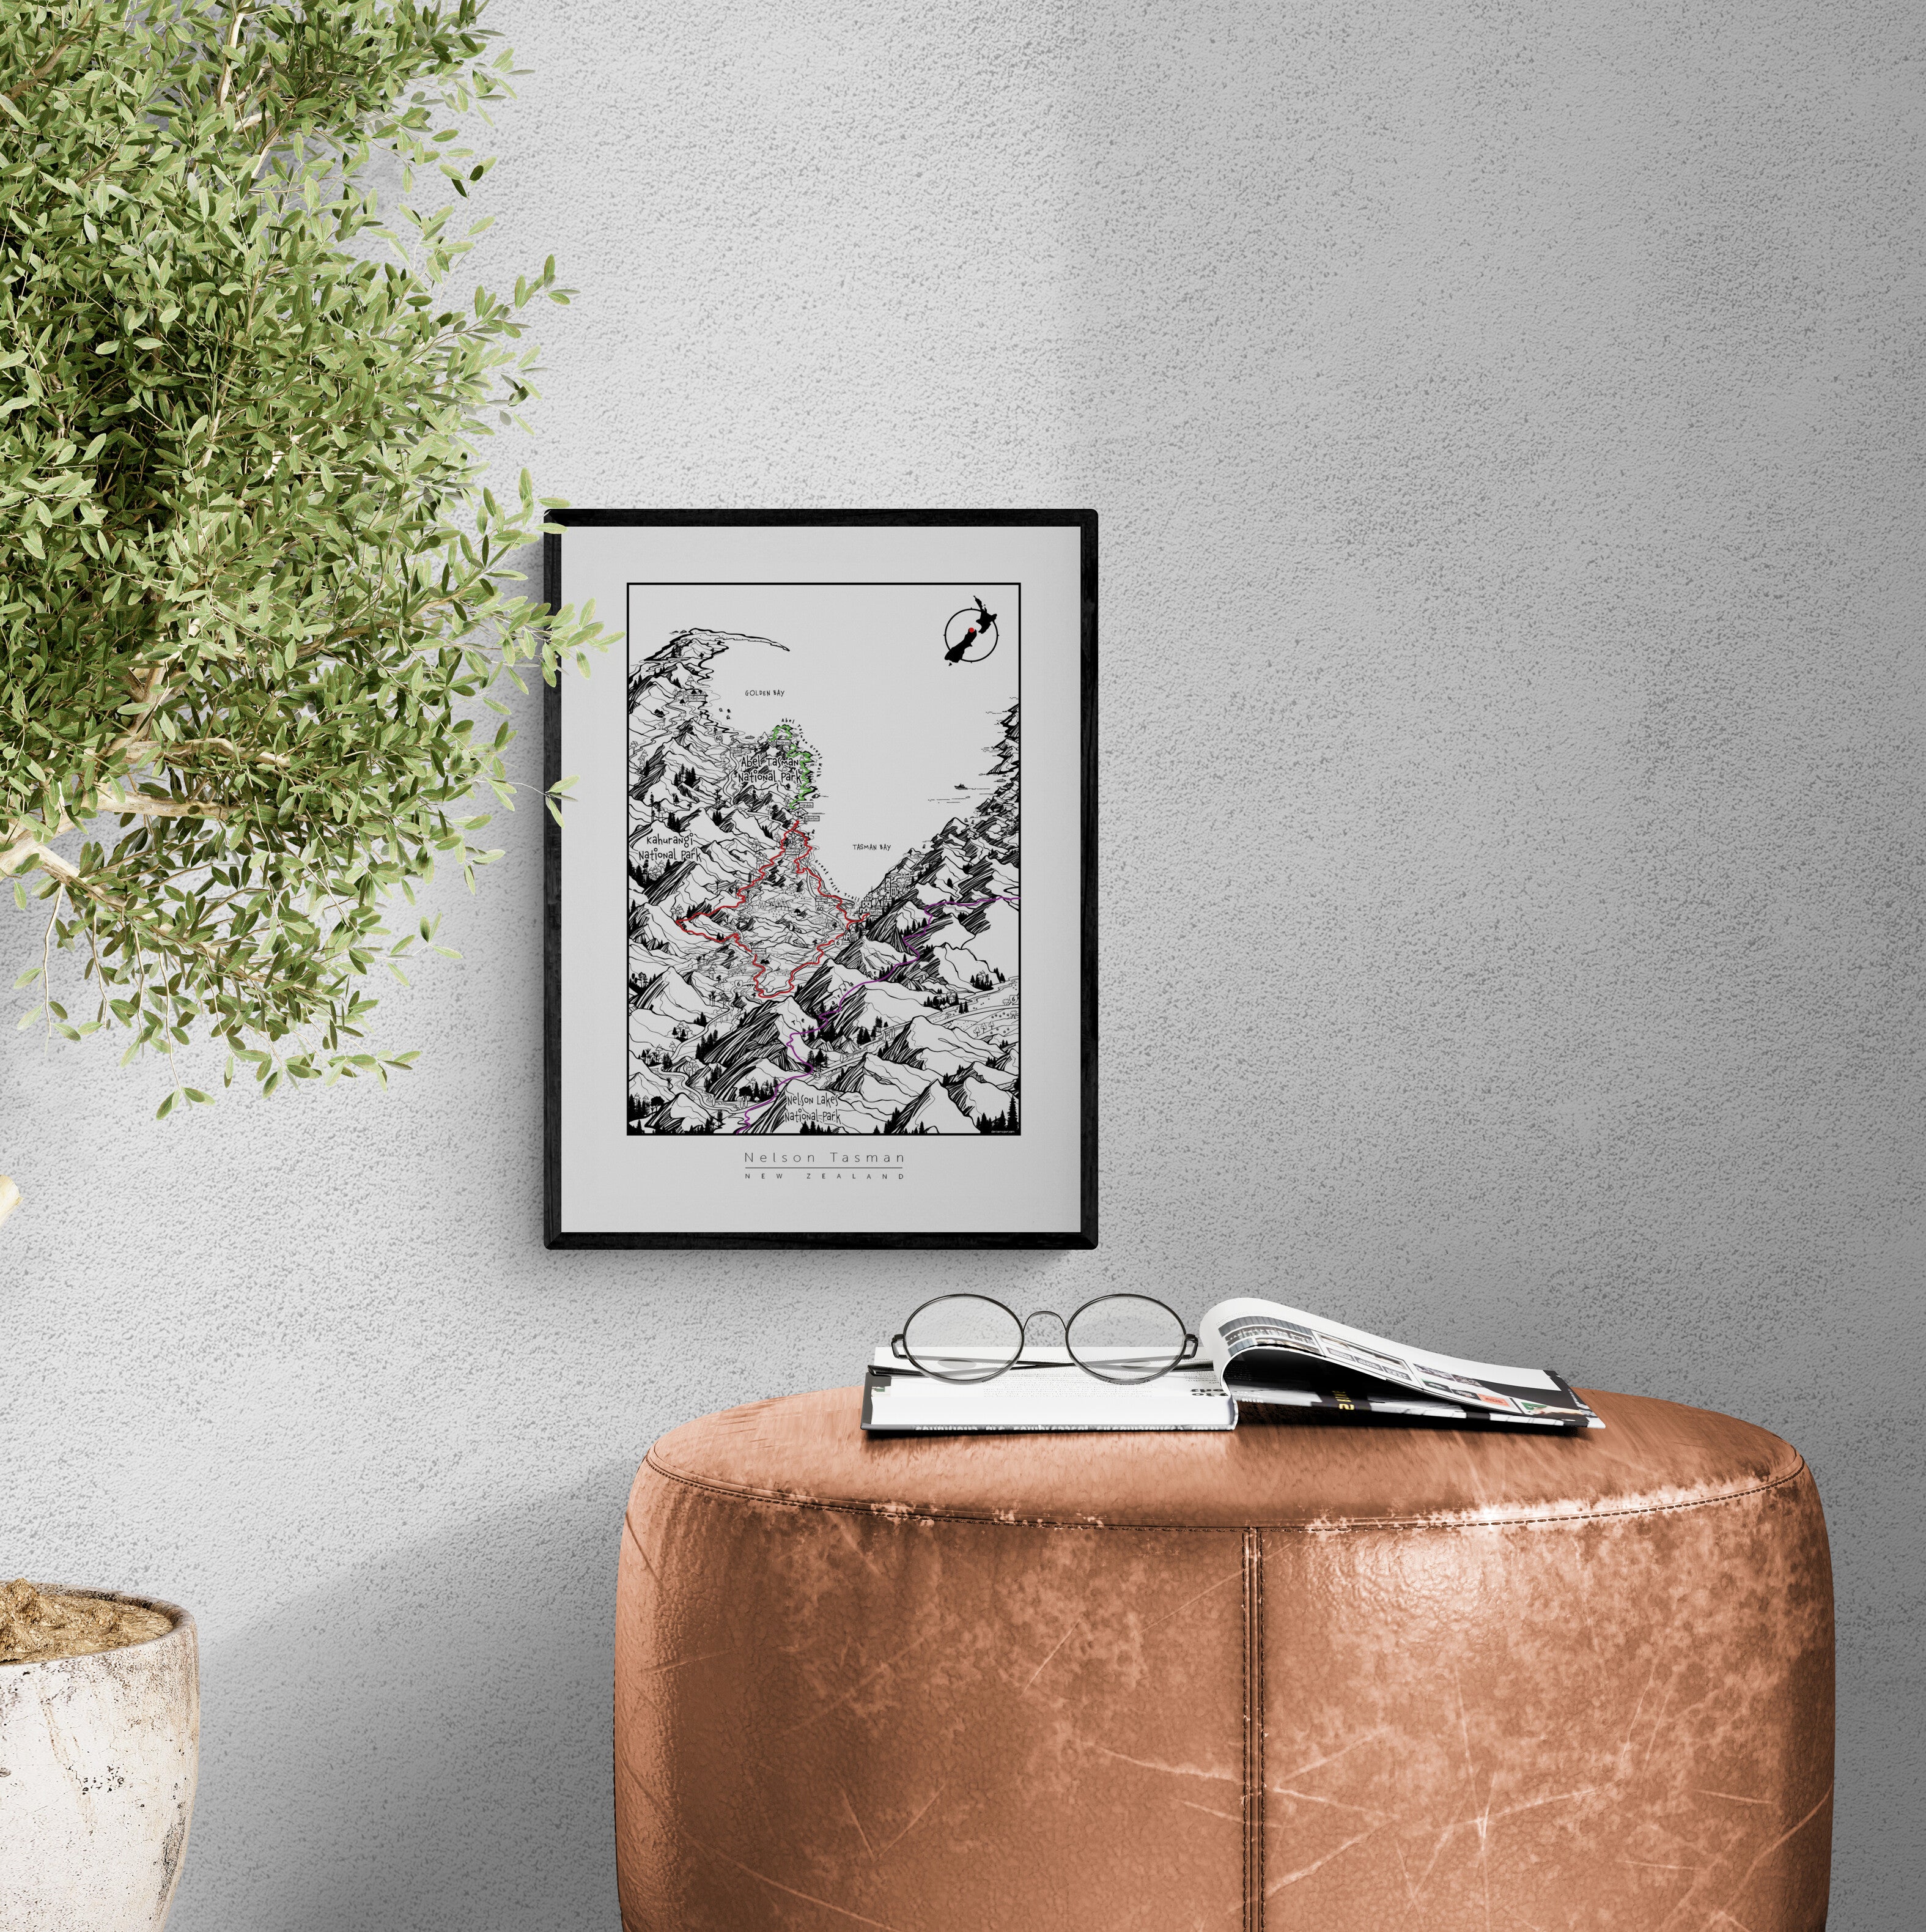 Nelson Tasman New Zealand map artwork is great for any interior design